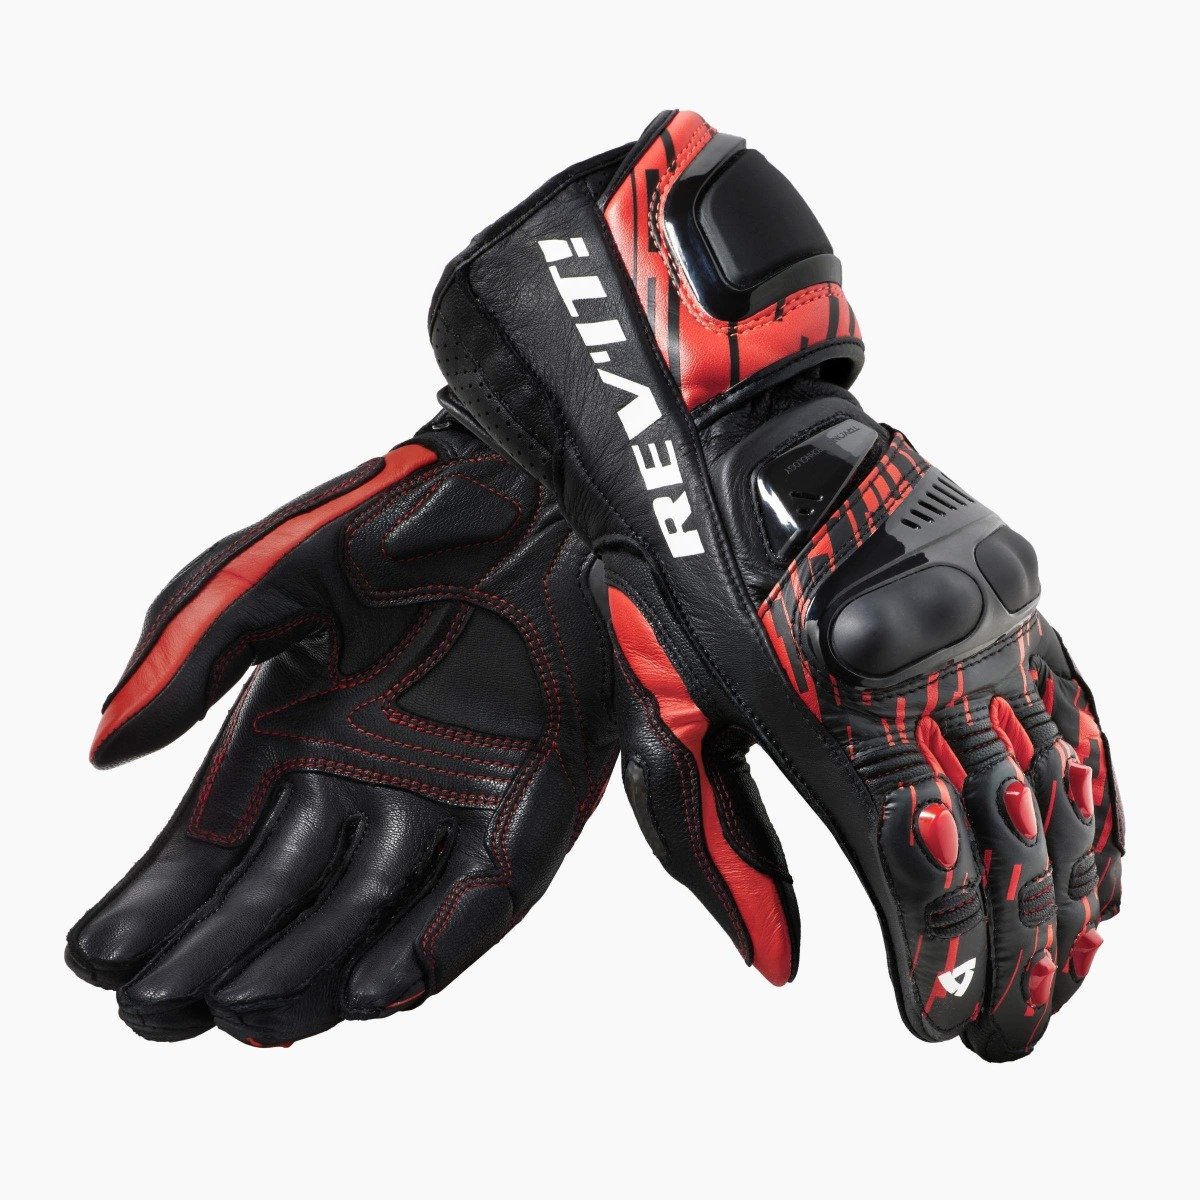 Image of REV'IT! Quantum 2 Neon Red Black Motorcycle Gloves Size 3XL ID 8700001308823